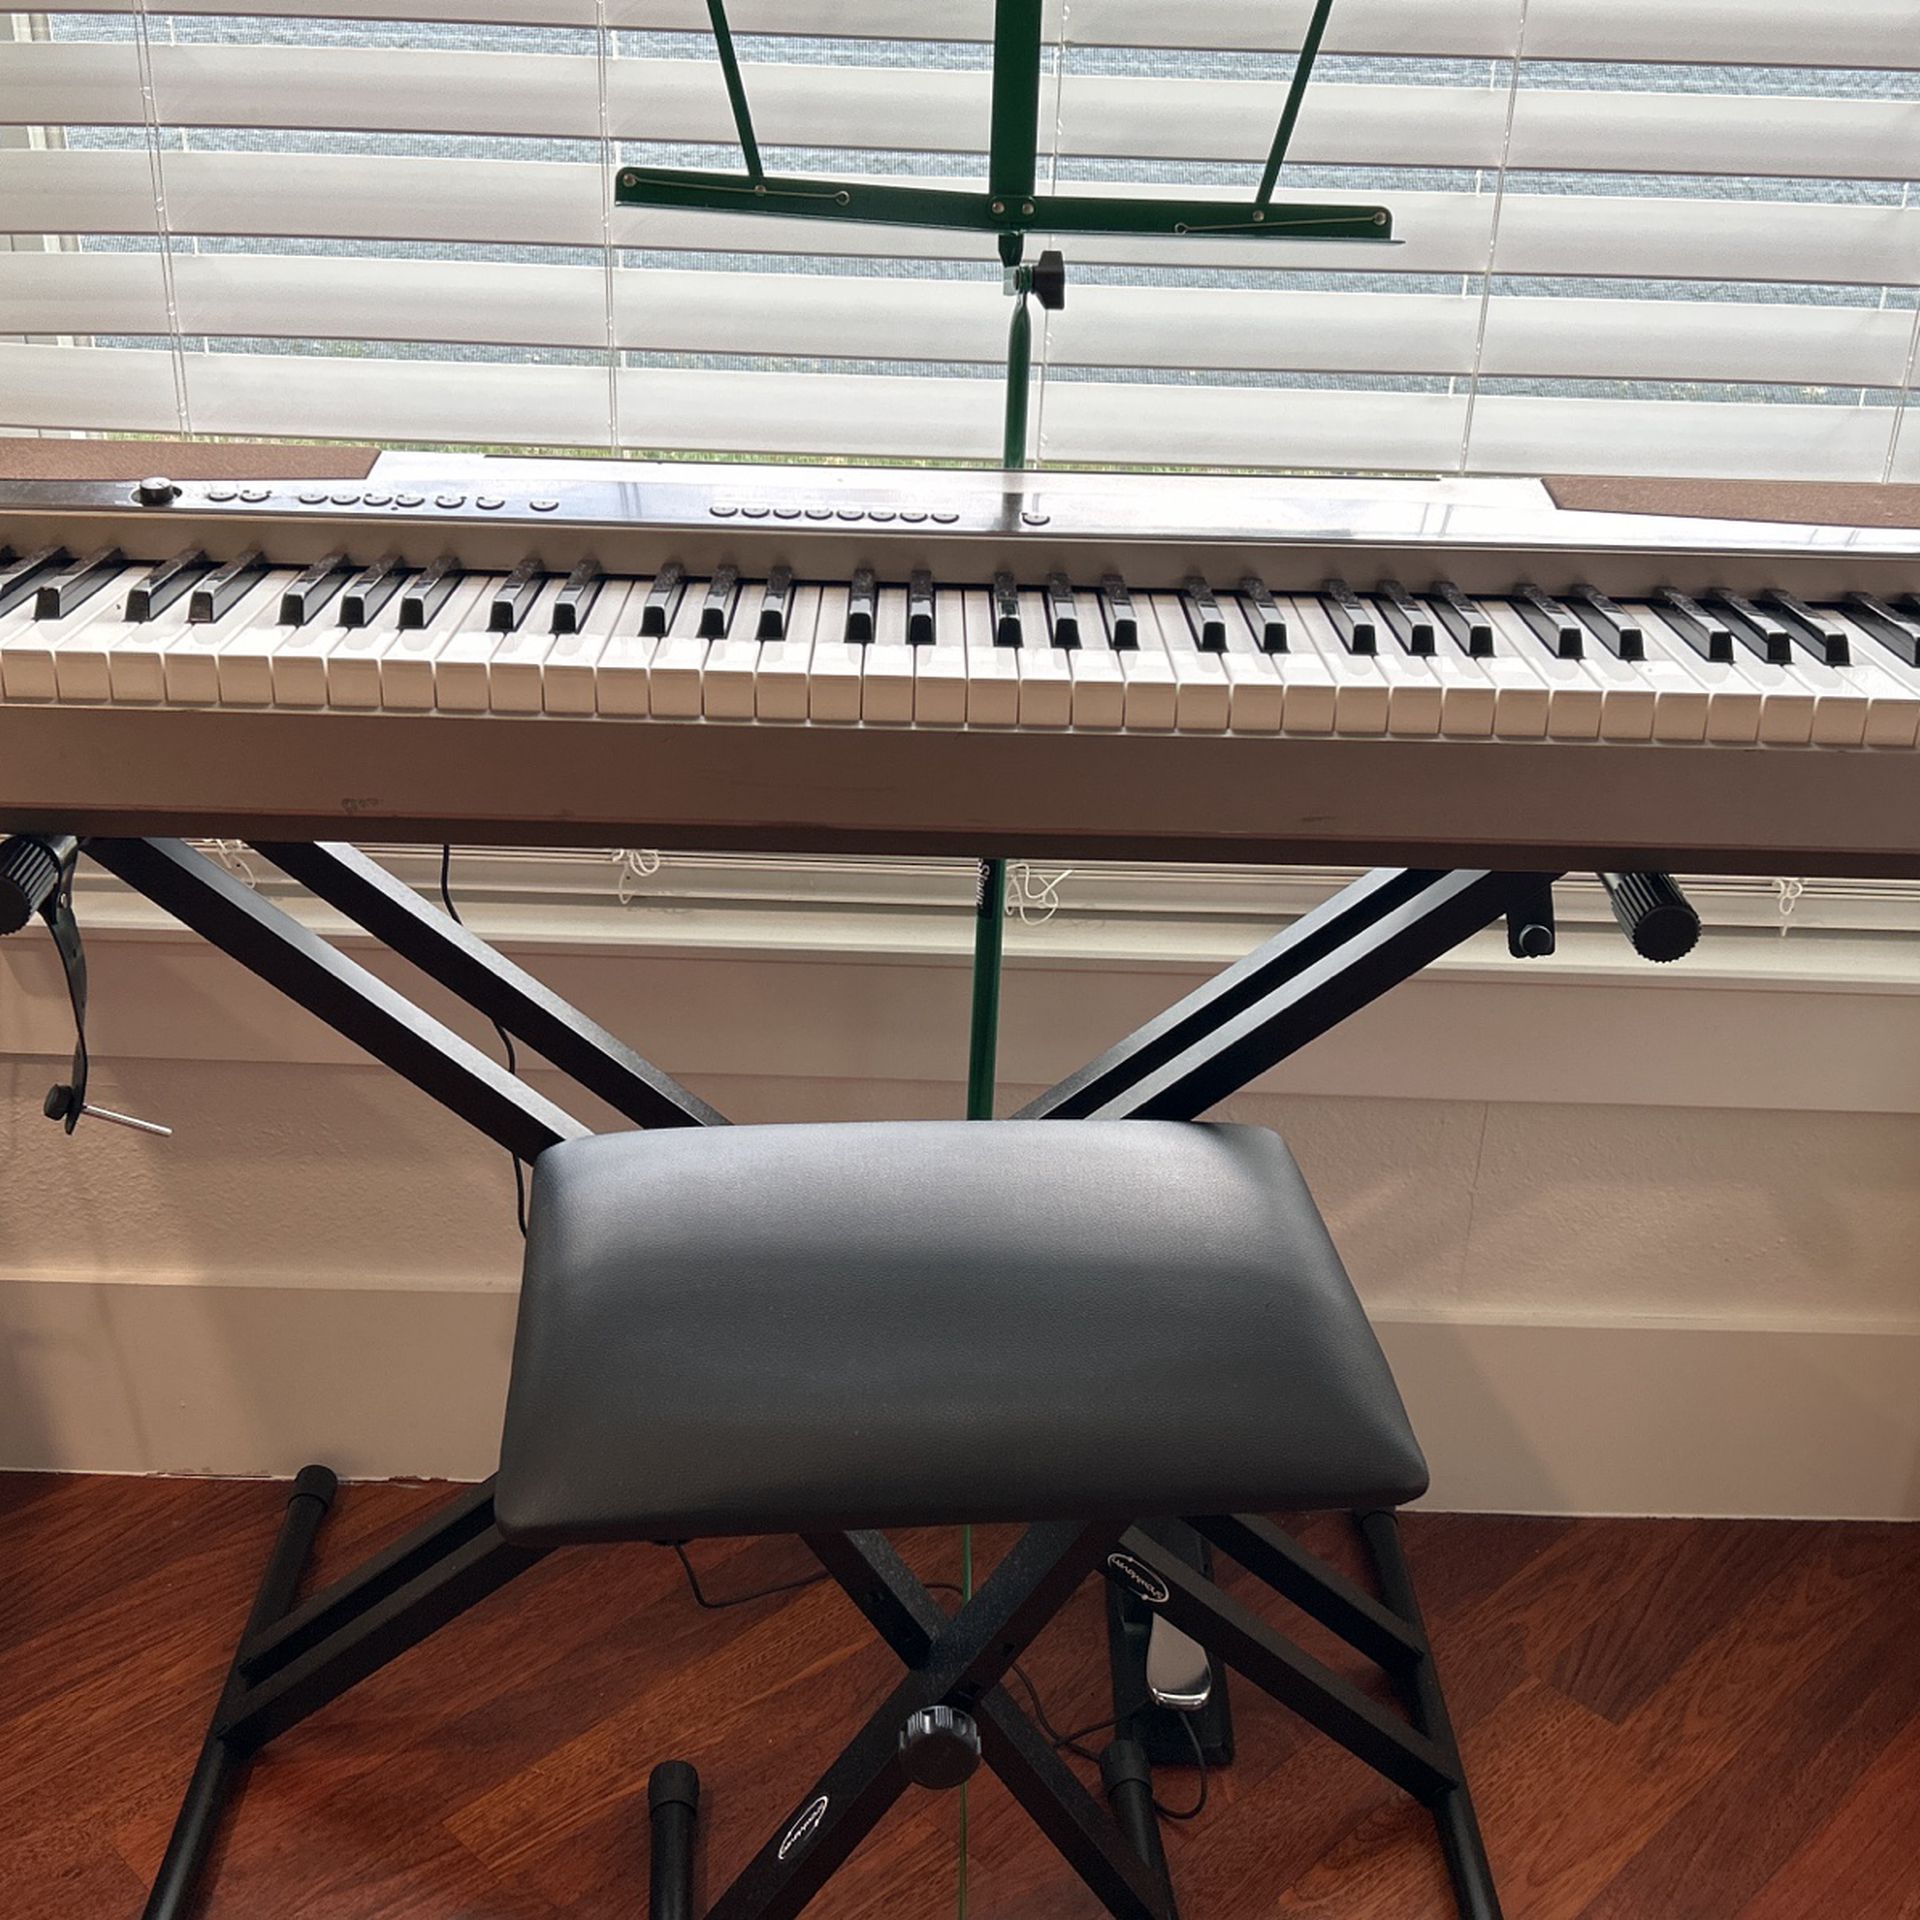 Piano KeyBoard with pedal, stand, & seat